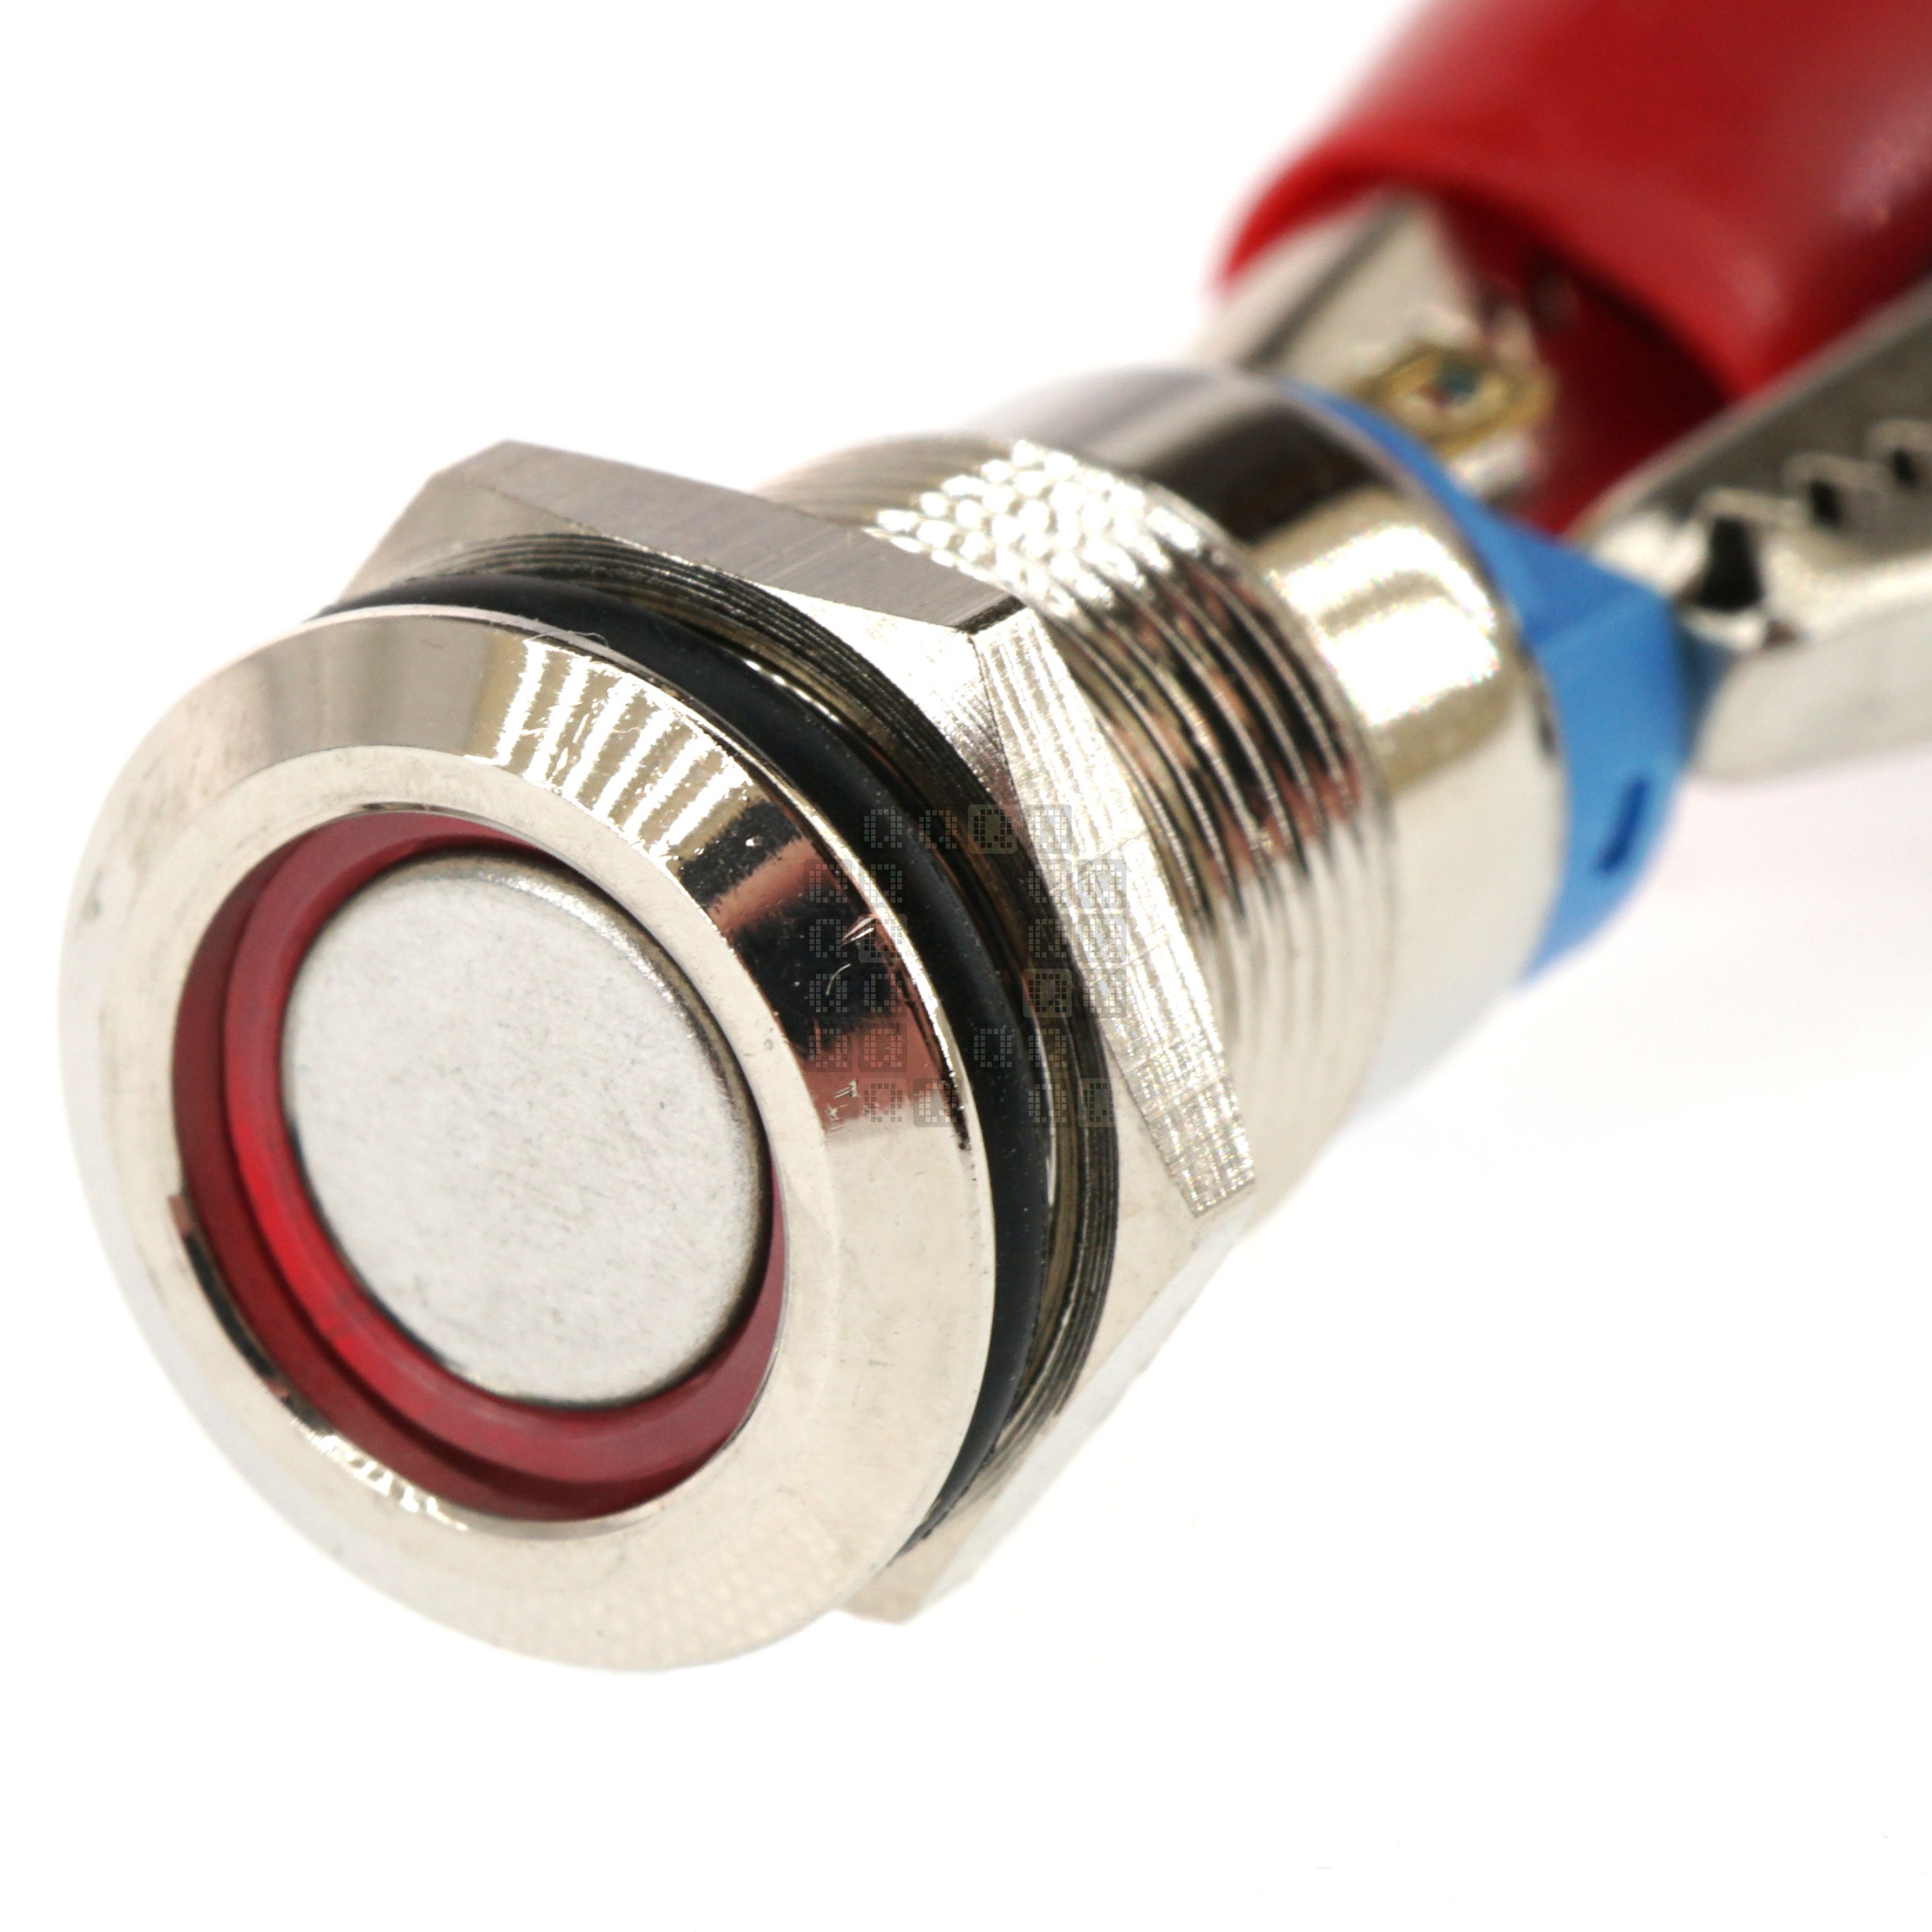 12mm Threaded Metal Pushbutton, Maintained, Red LED, 12-24VDC, IP65, SPST, Lighted Ring/Circle